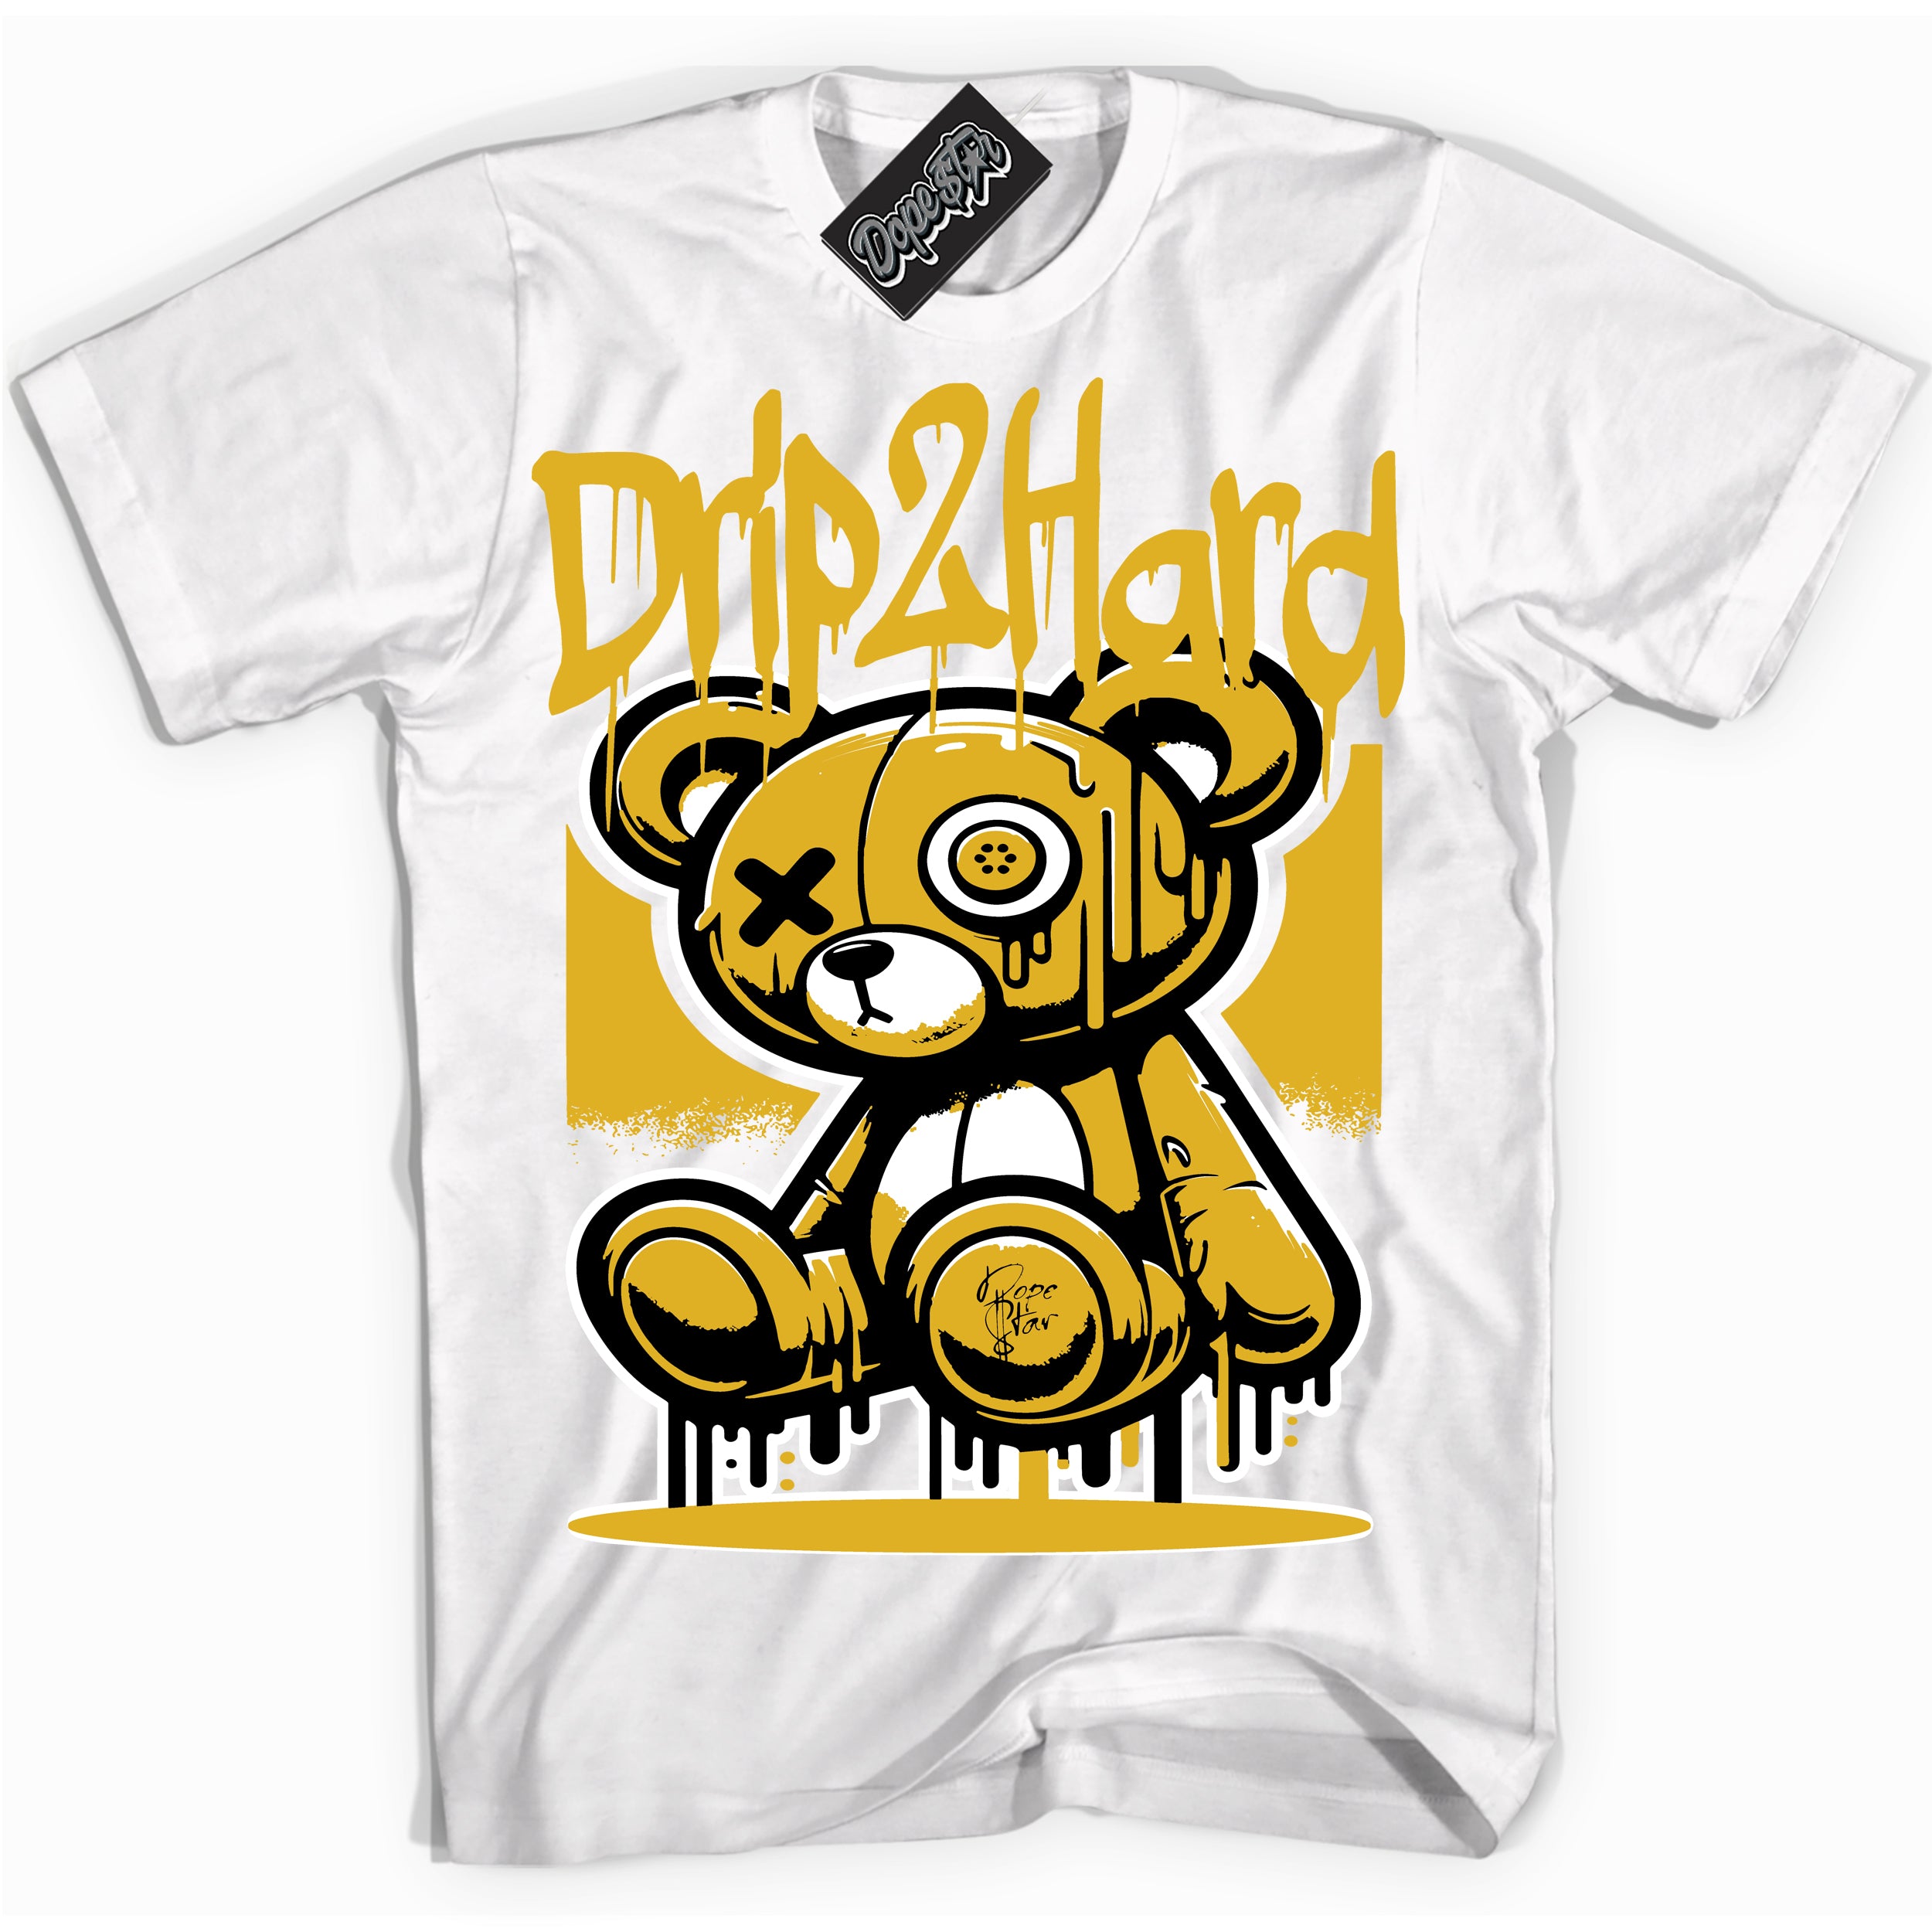 Cool White graphic tee with “ Drip 2 Hard ” design, that perfectly matches Taxi 1s